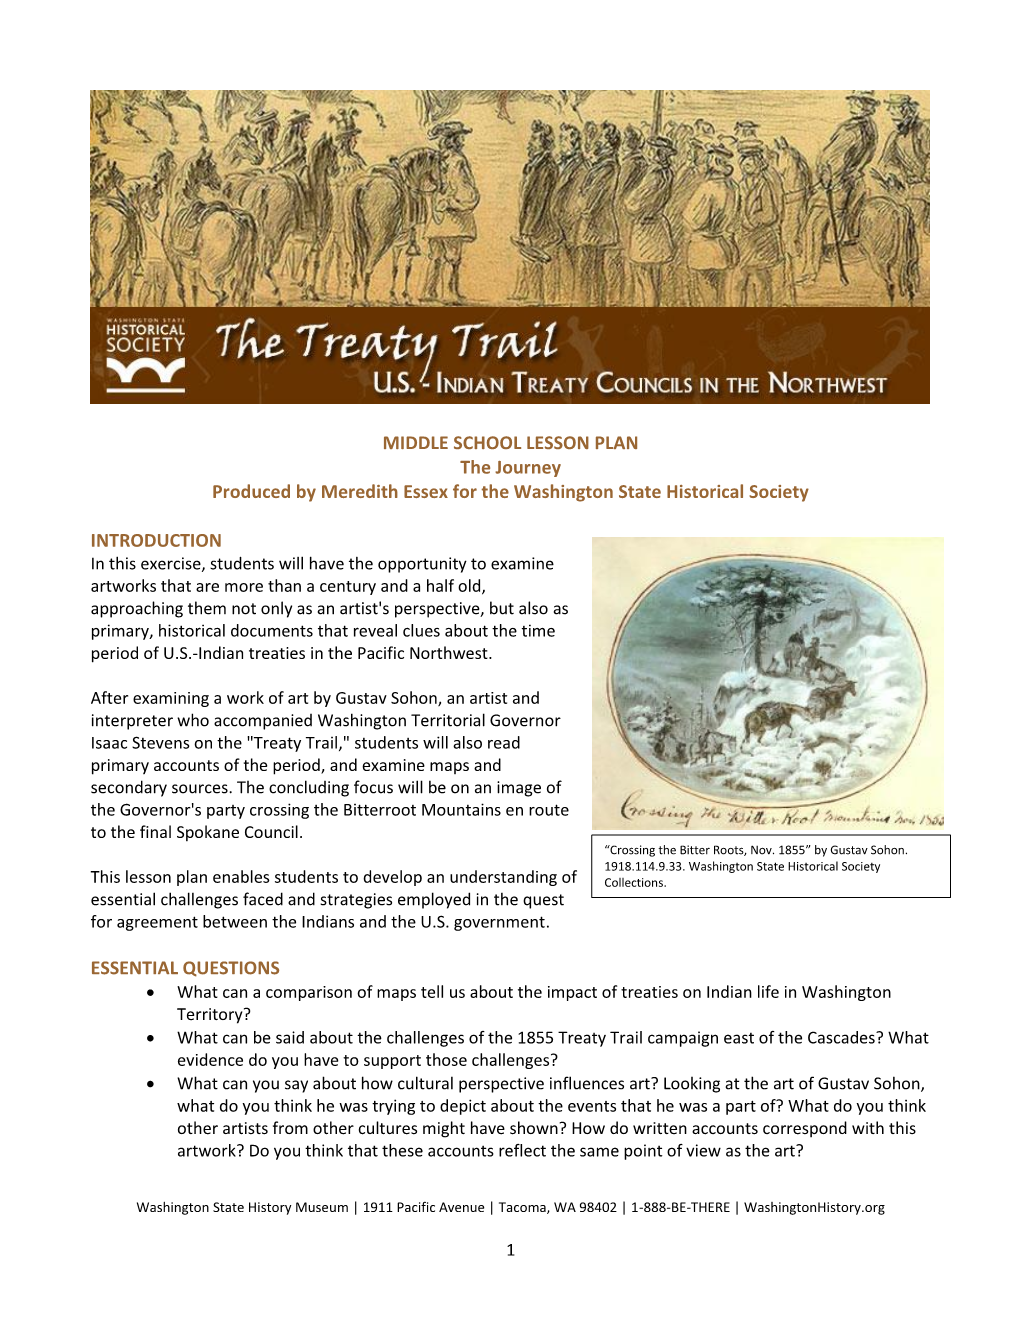 MIDDLE SCHOOL LESSON PLAN the Journey Produced by Meredith Essex for the Washington State Historical Society